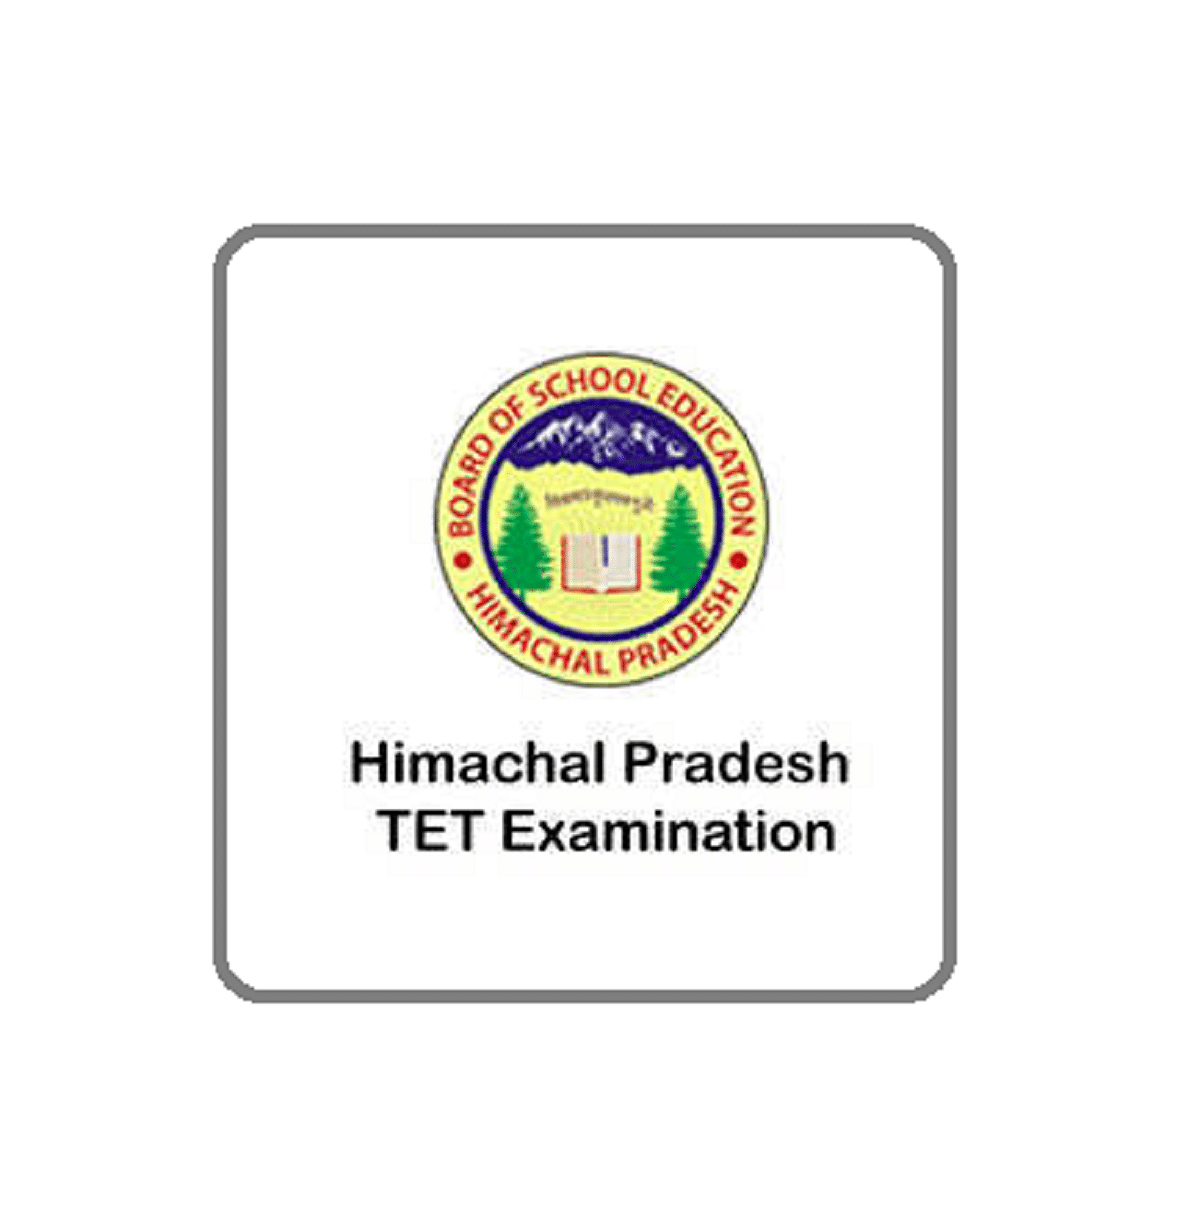 HP TET 2020: HPBOSE Postponed All Exams Till Further Notice, Check Updates